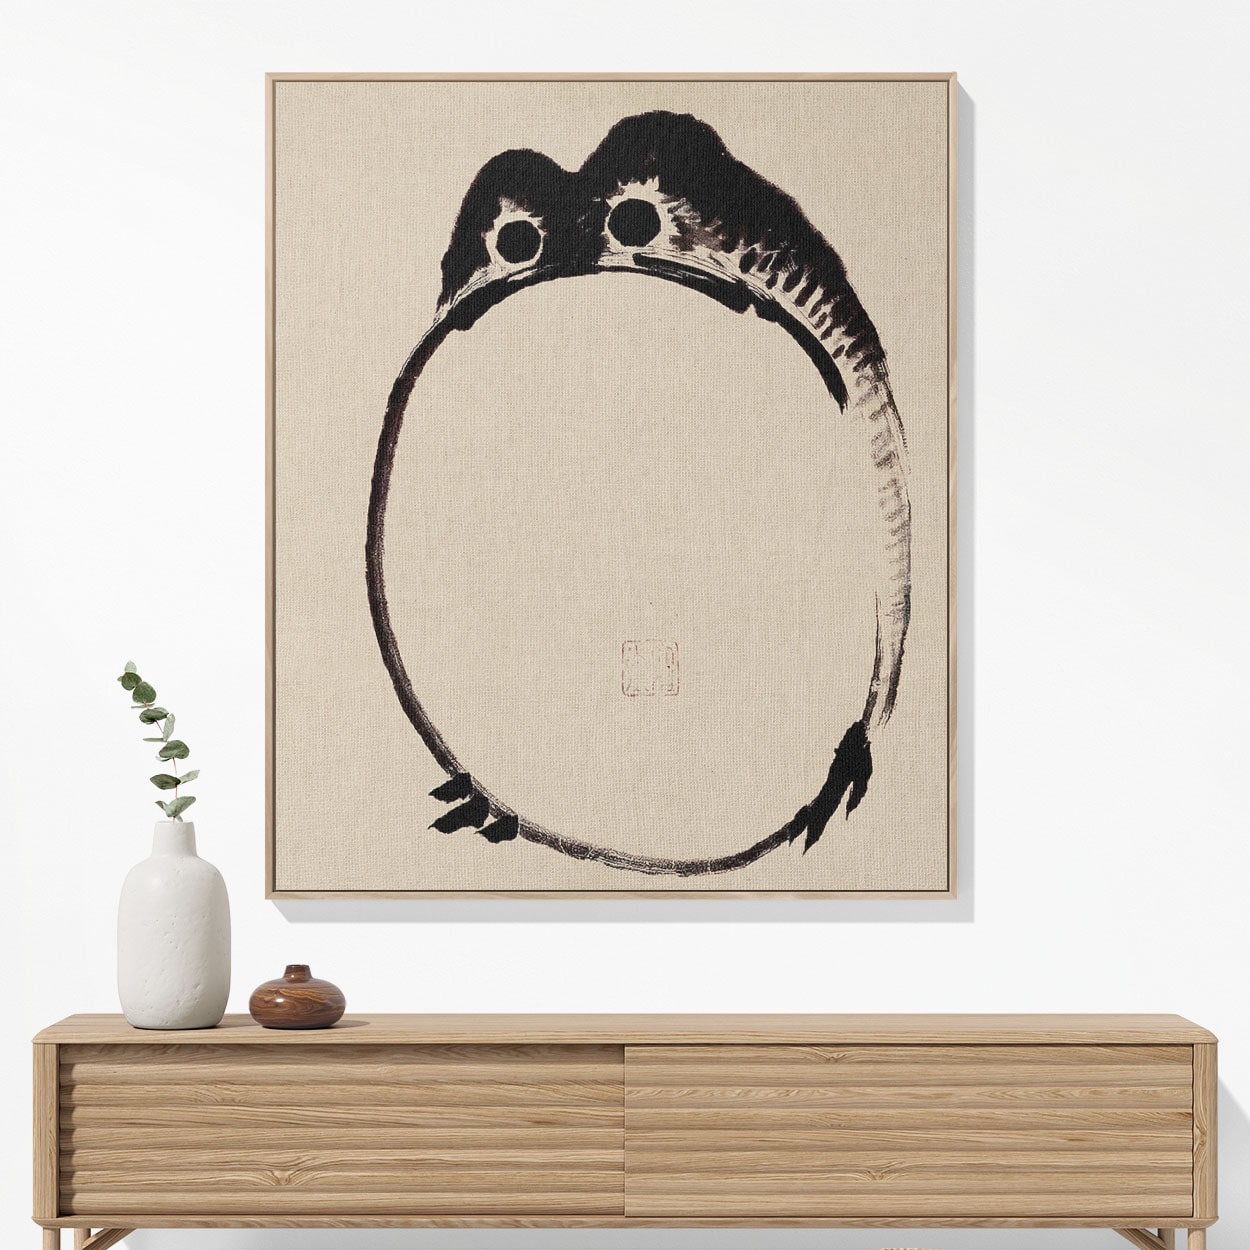 Funny Japanese Toad Woven Blanket Woven Blanket Hanging on a Wall as Framed Wall Art